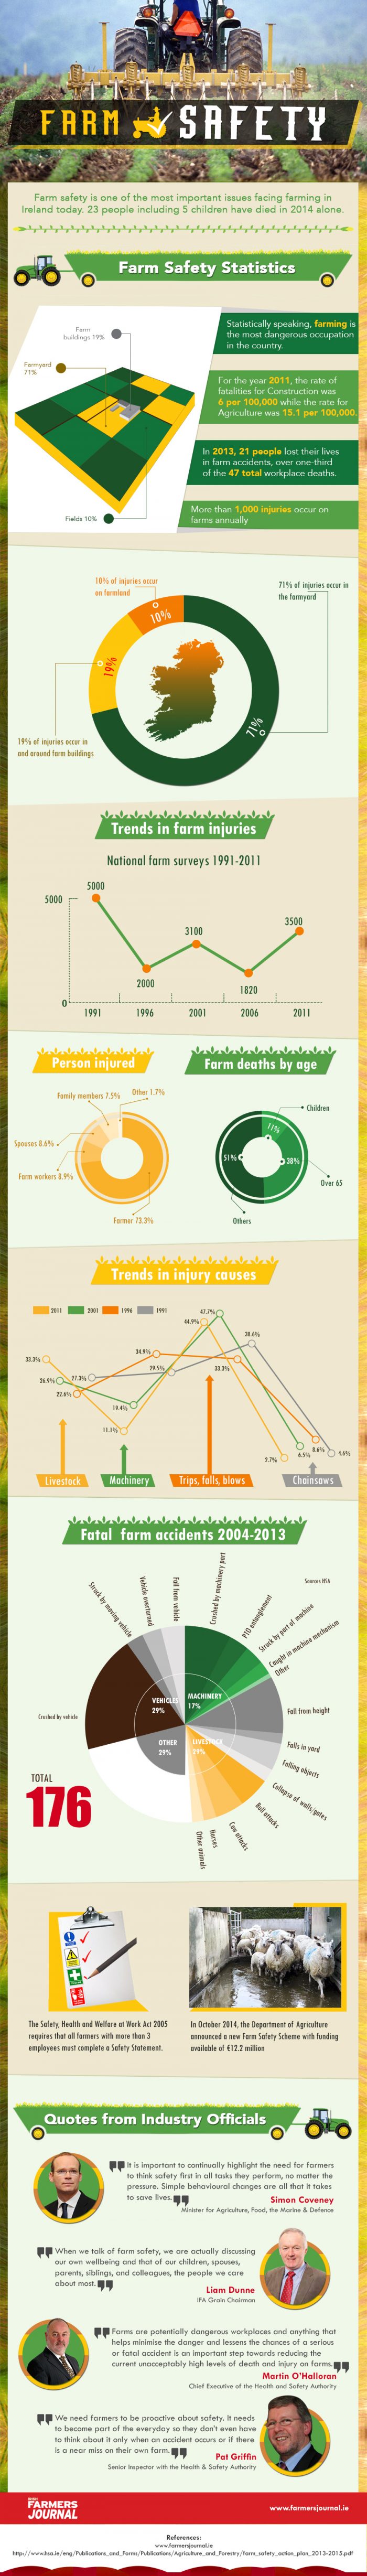 FARM SAFETY INFOGRAPHIC